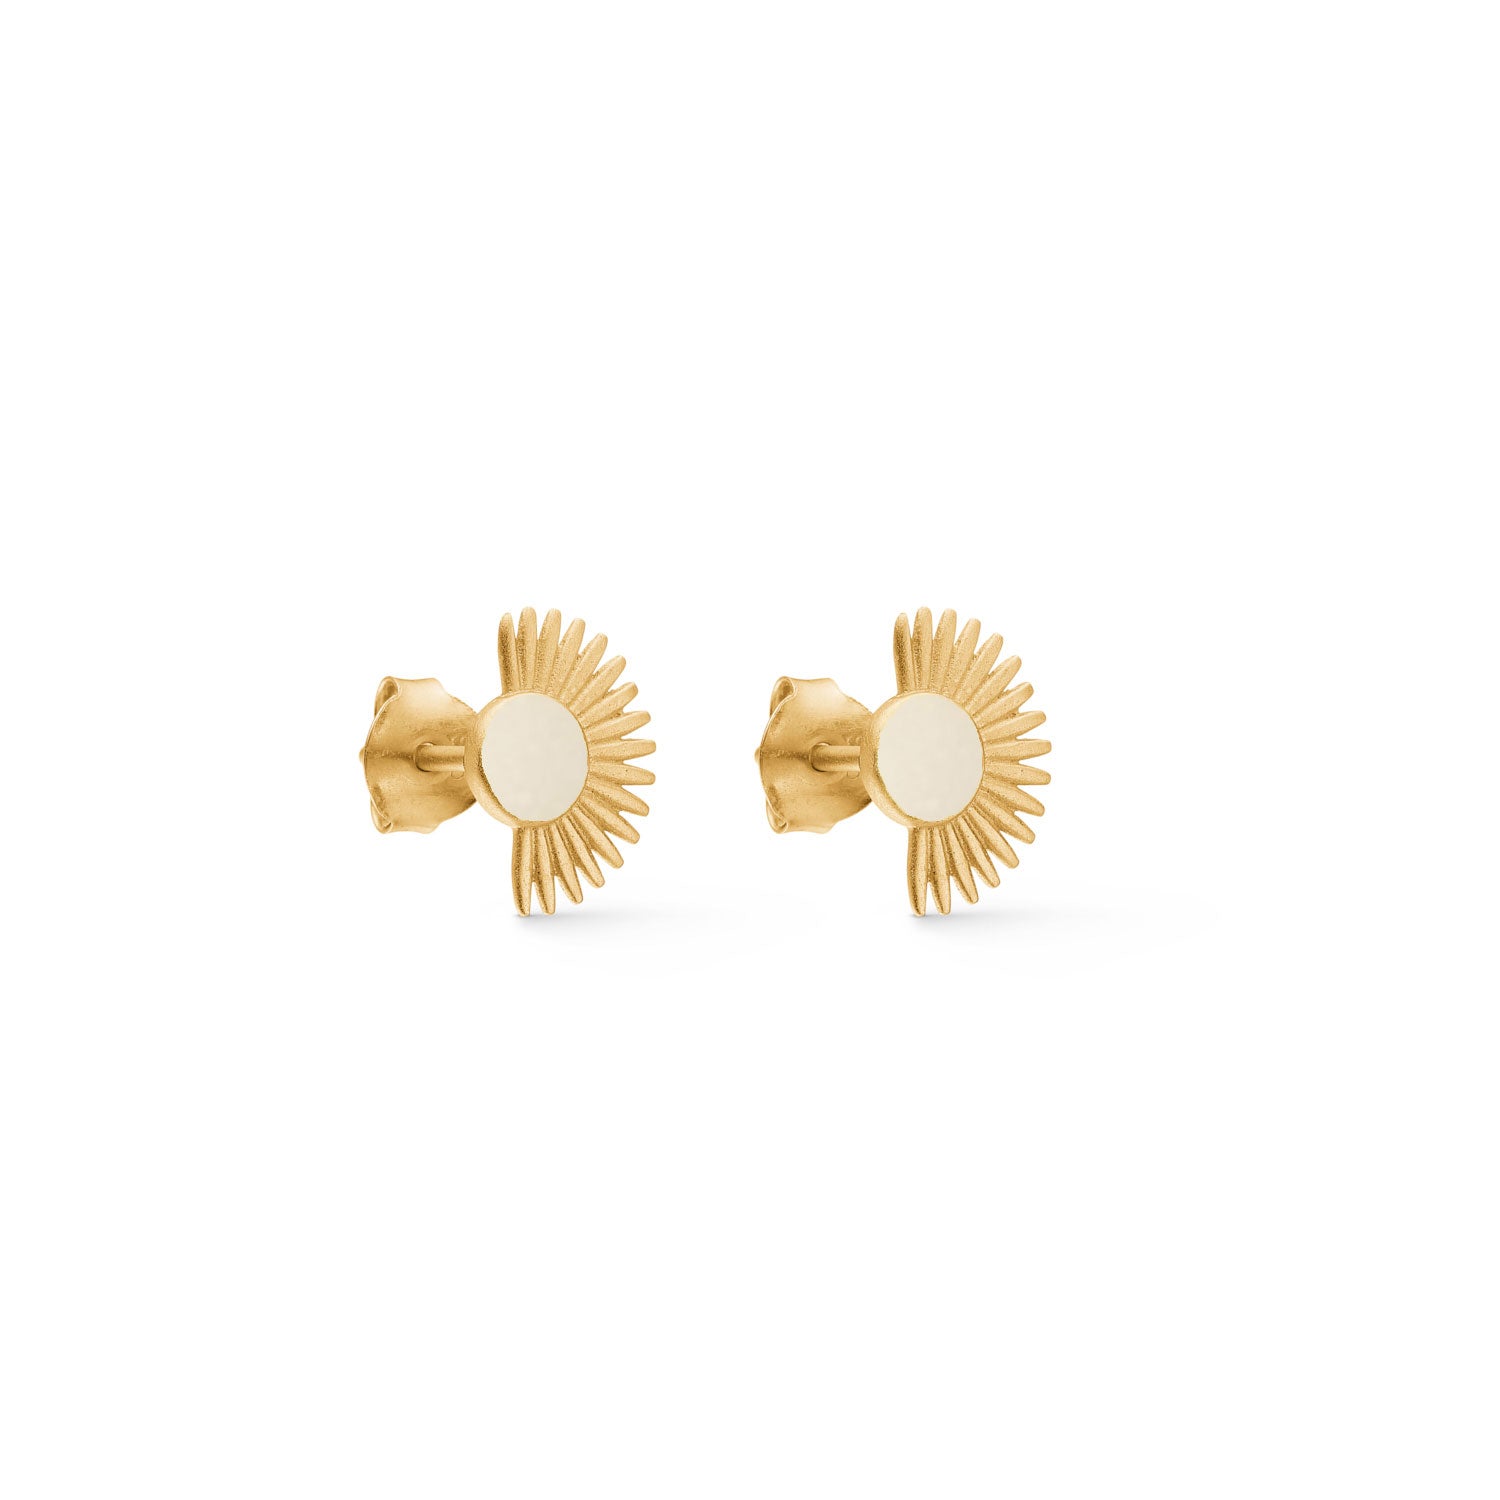 Soleil 'Daisy' 18k gold-plated Earring Studs